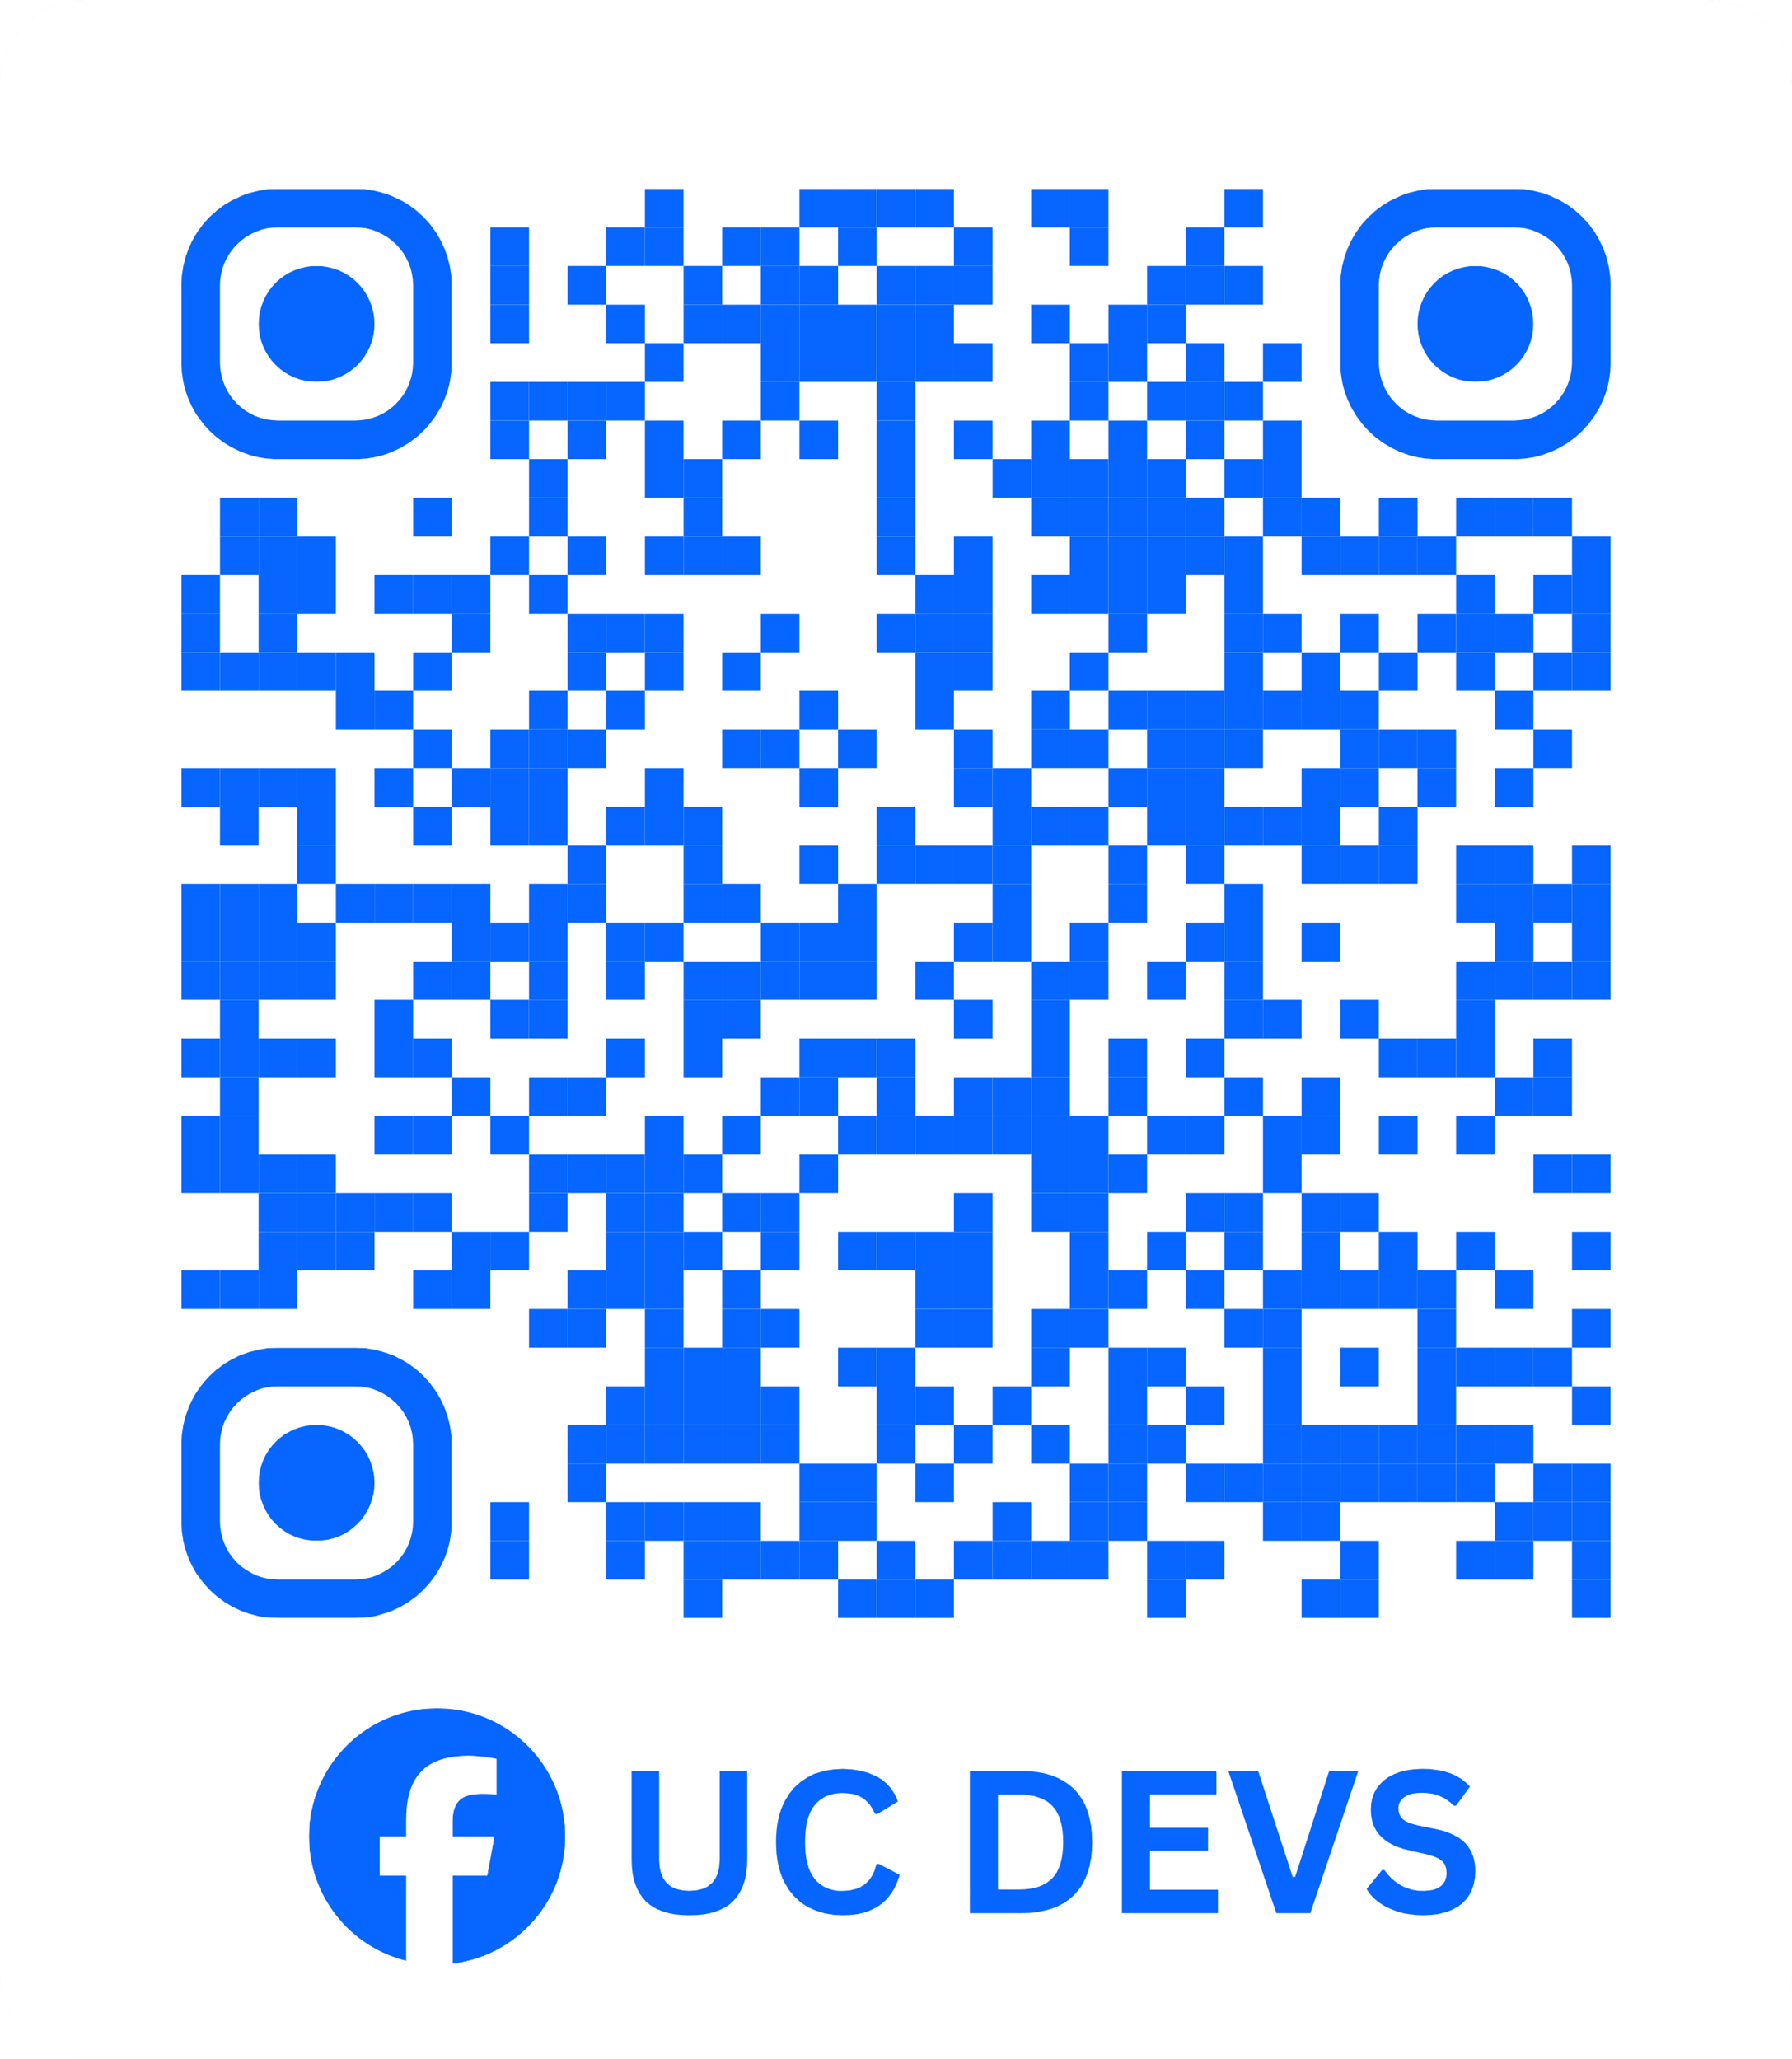 Barcode to the UC DEVS Facebook page